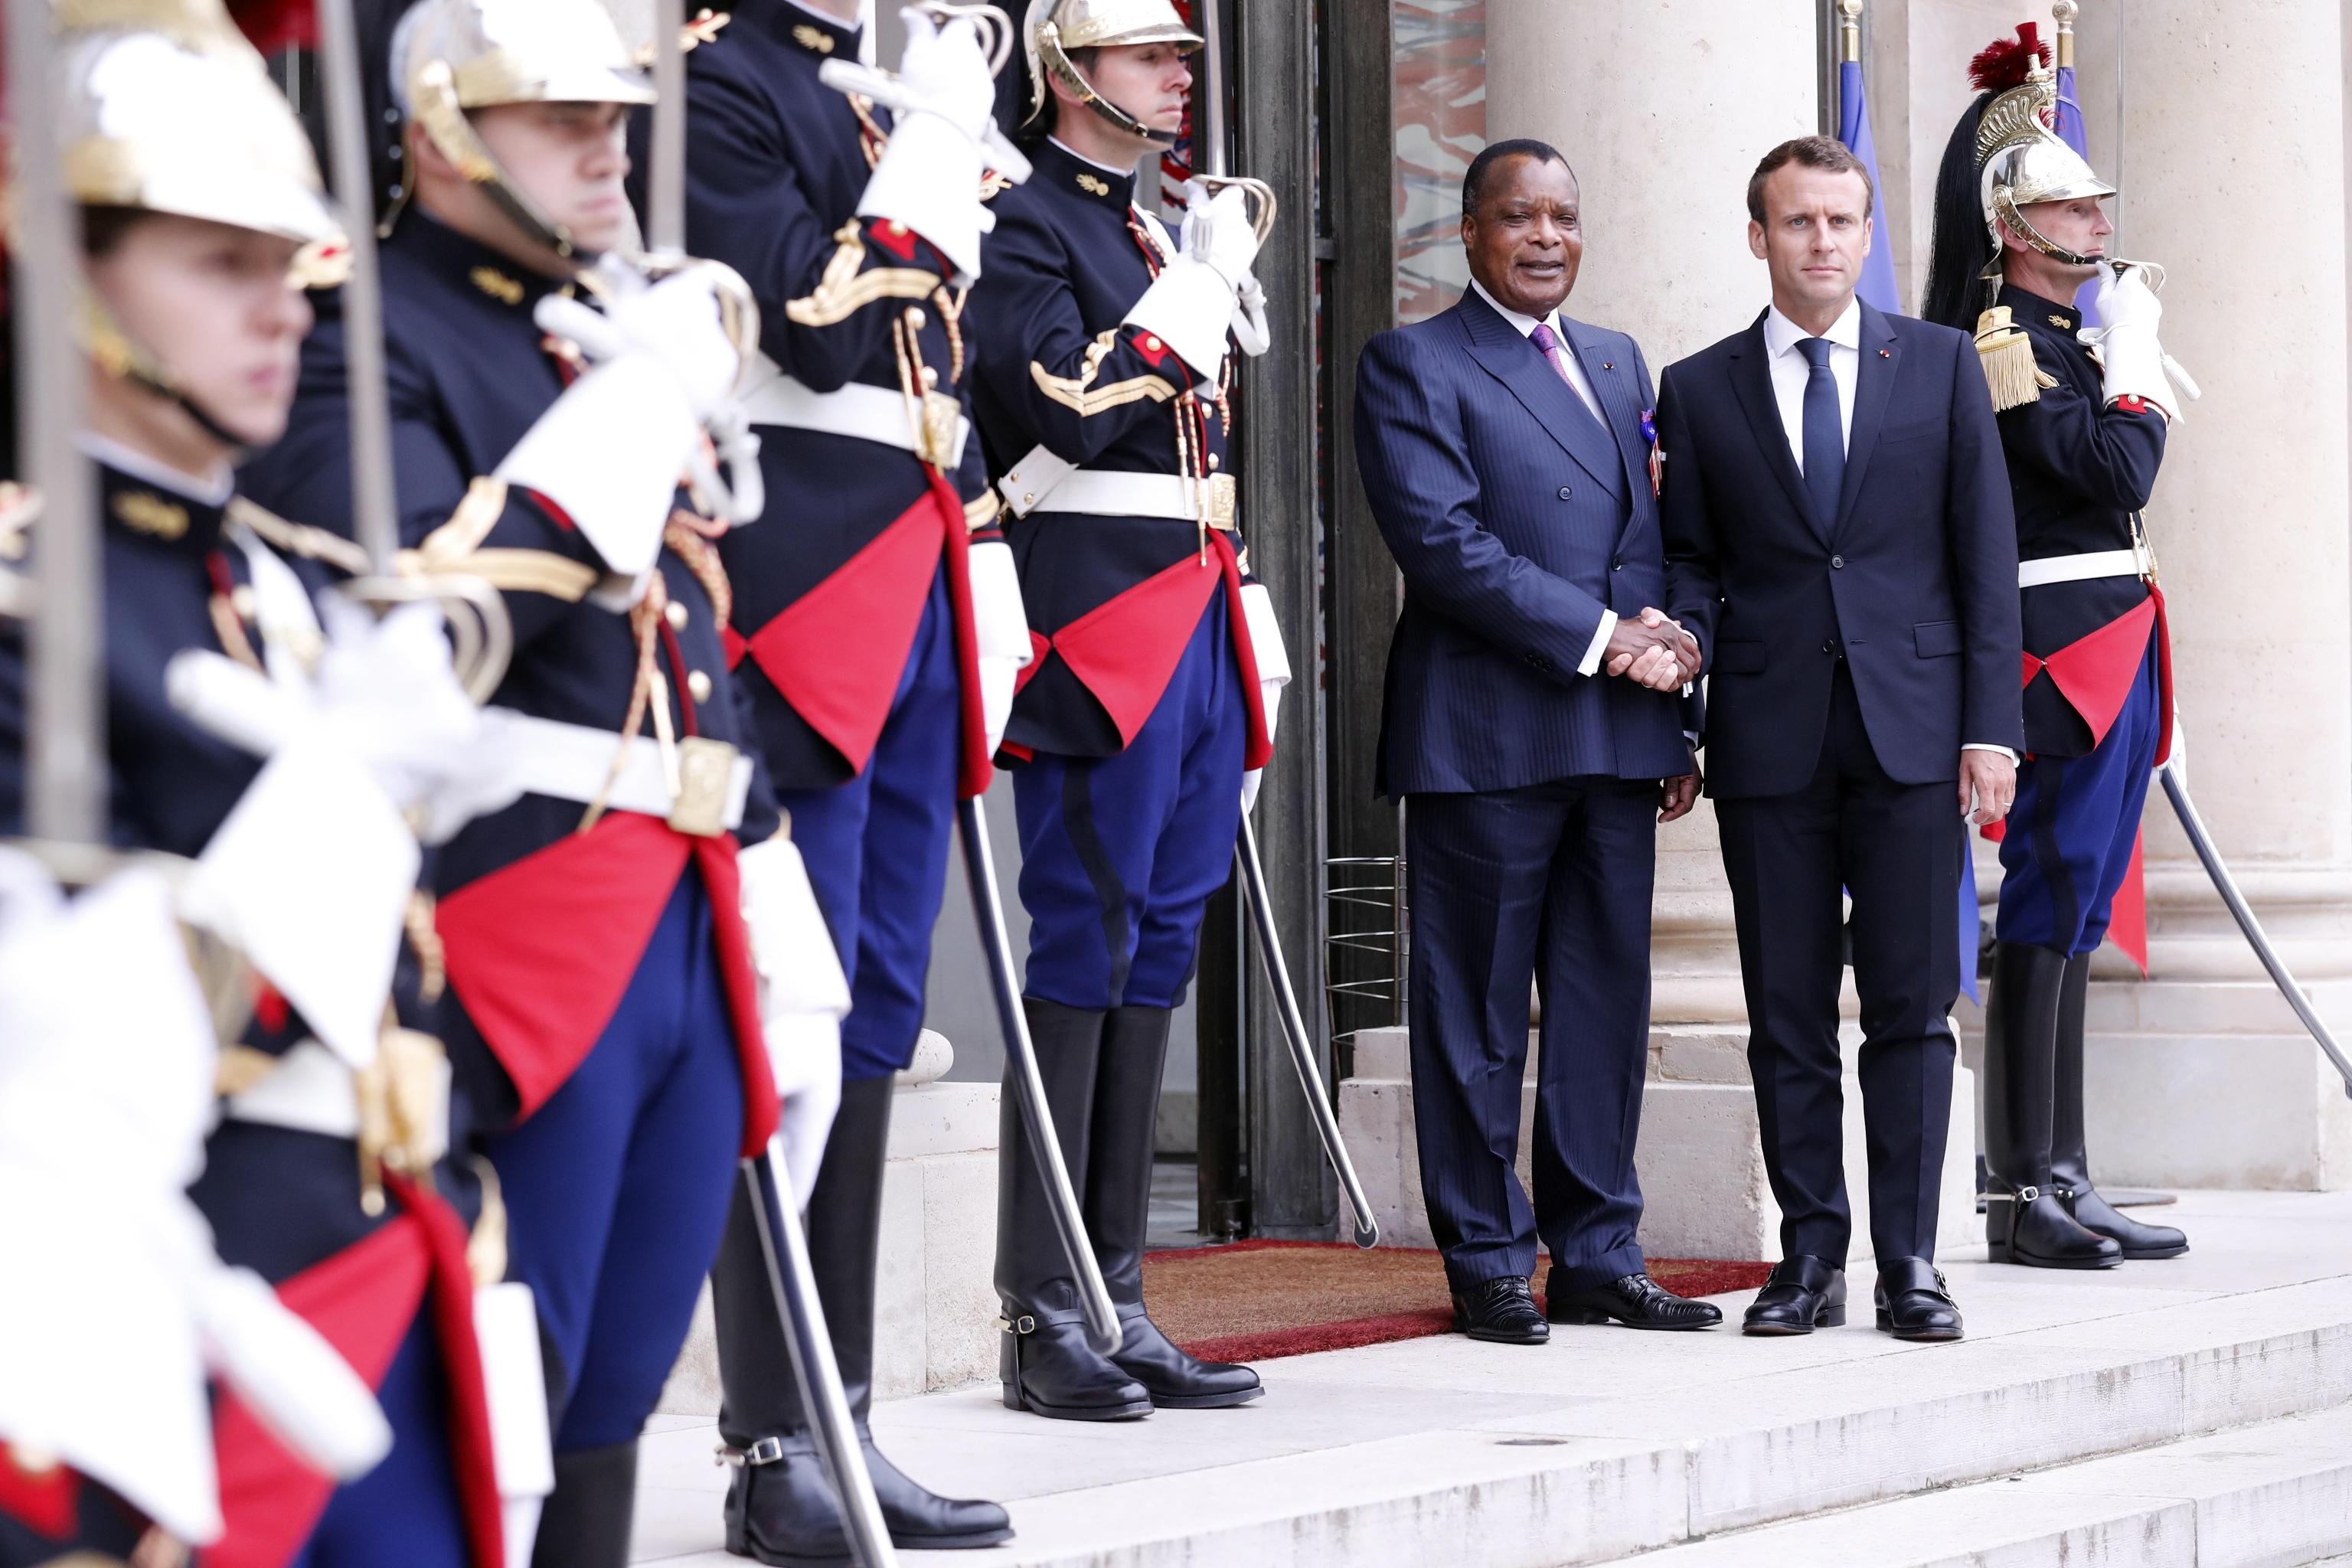 epa06770227 French President Emmanuel Macron (R) welcomes Congo President Denis Sassou Nguesso (L), upon his arrival for the international congress on Libya, at the Elysee Palace in Paris, France, 29 May 2018.  EPA/ETIENNE LAURENT